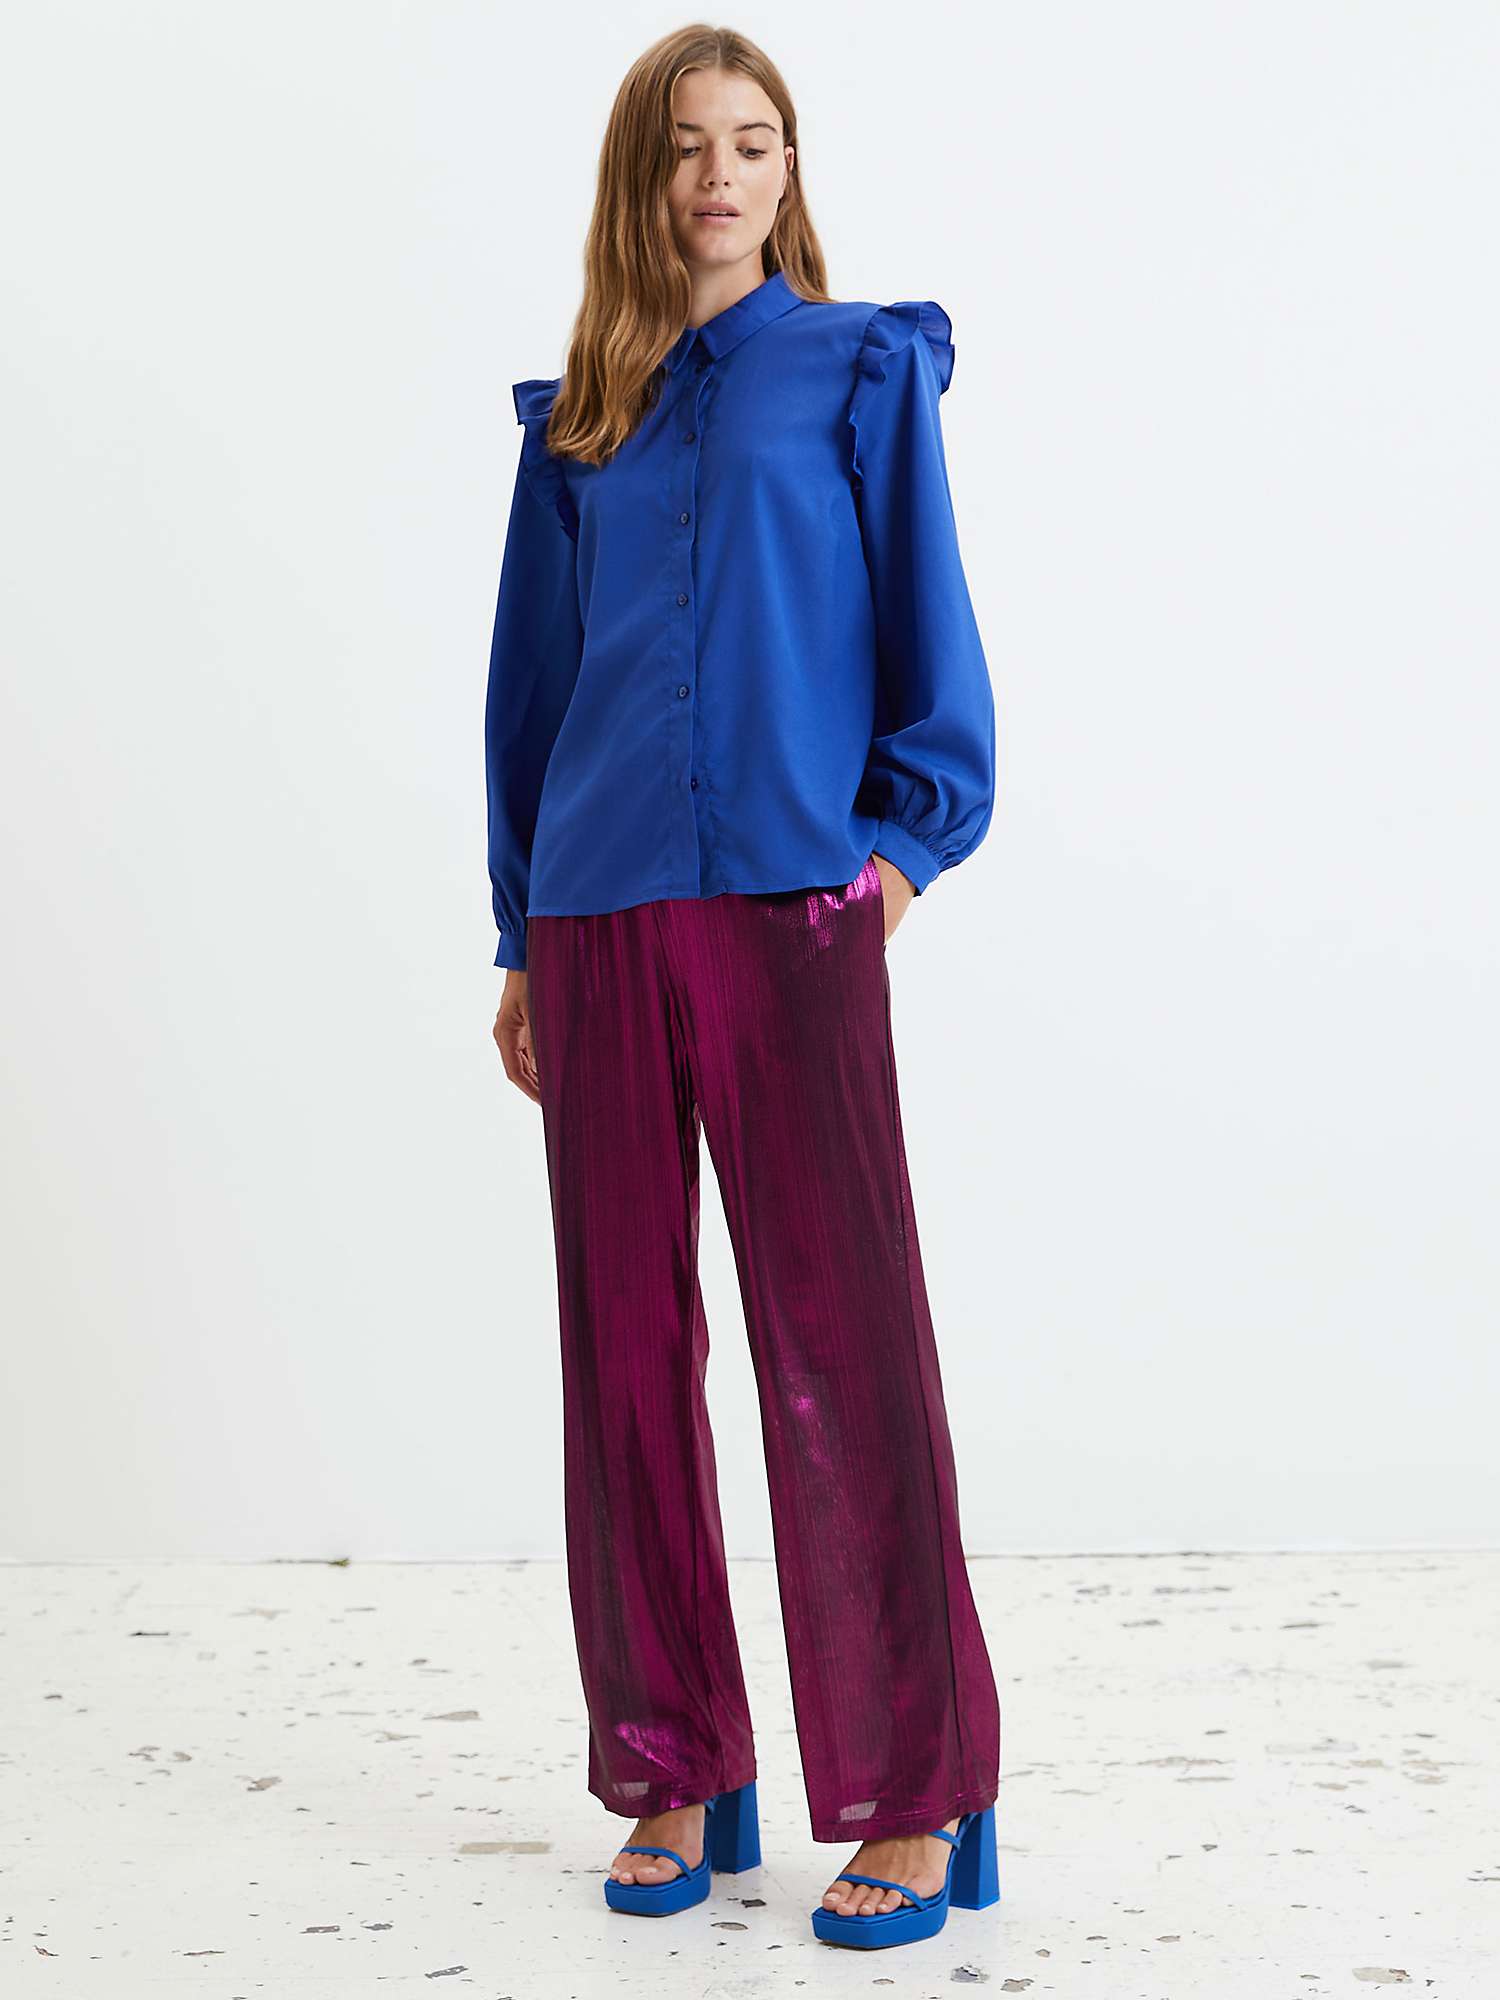 Buy Lollys Laundry Alexis Frill Detail Blouse Online at johnlewis.com